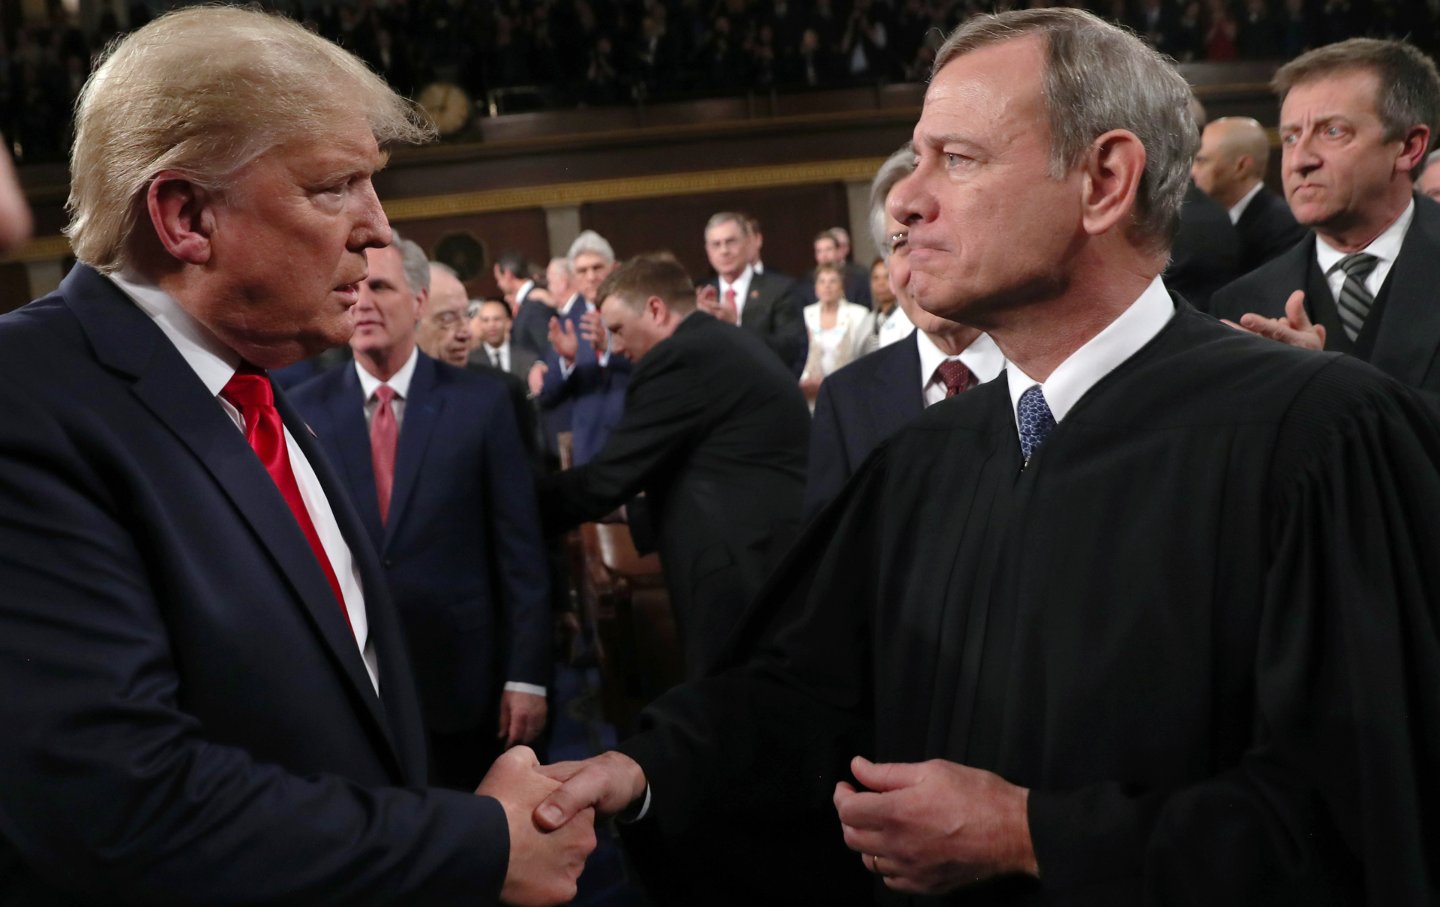 President Donald Trump shakes hands with Supreme Court Chief Justice John Roberts before the State of the Union address in the House chamber on February 4, 2020, in Washington, D.C